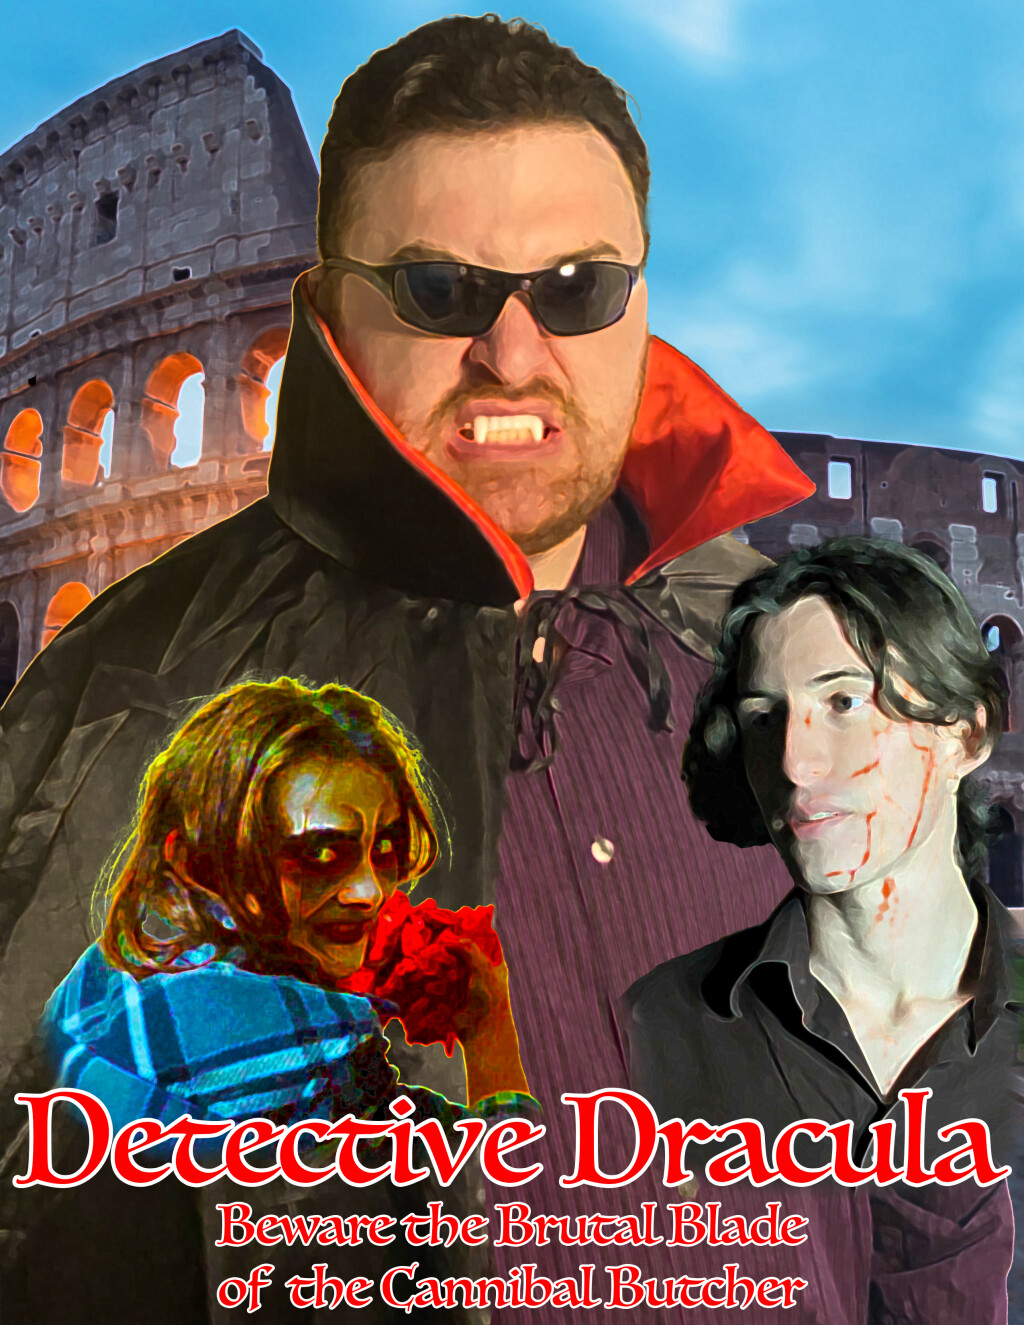 Filmposter for Detective Dracula: Beware the Brutal Blade of the Cannibal Butcher